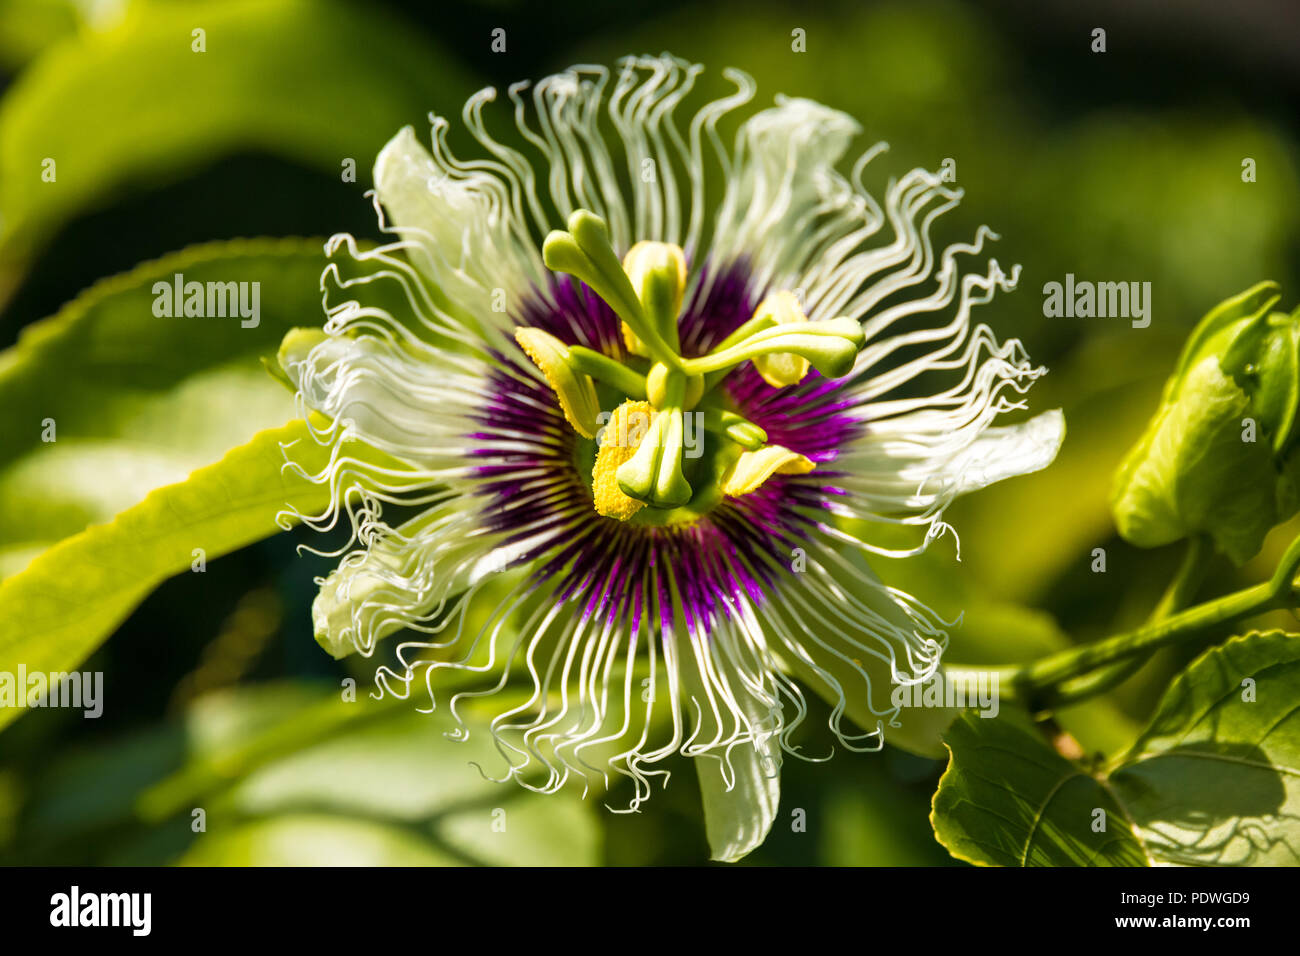 Close up of a beautiful passion flower (Passiflora edulis) cultivated in a garden in Malaysia. The base of the flower is a rich purple with 5 stamens. Stock Photo